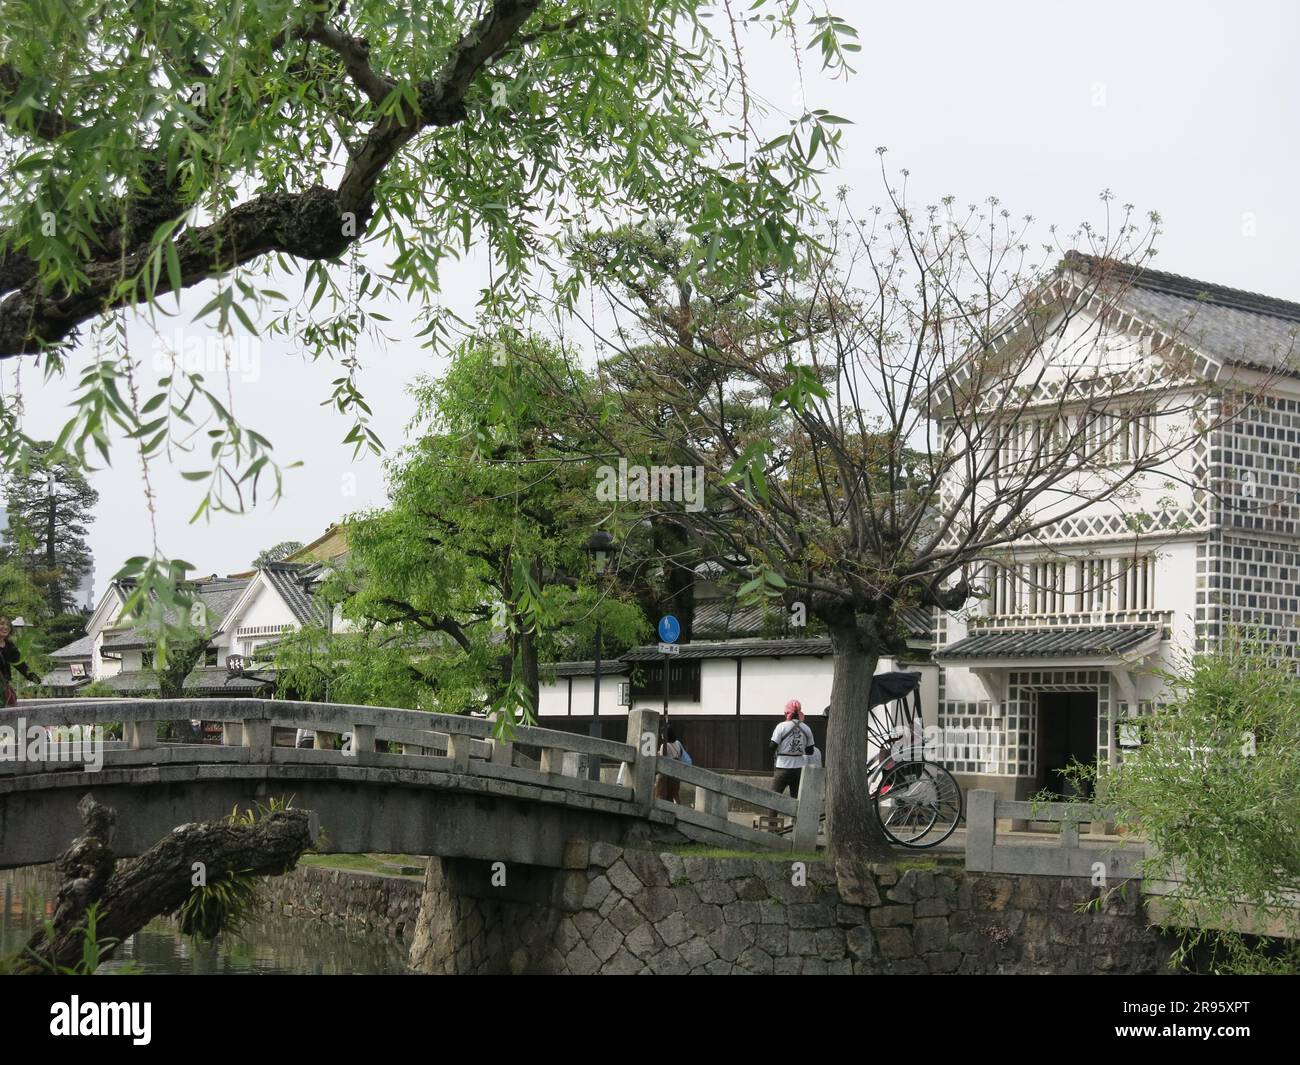 Kurashiki has a preserved canal area with the old rice warehouses painted white with black tiles, and weeping willows lining the waterside. Stock Photo